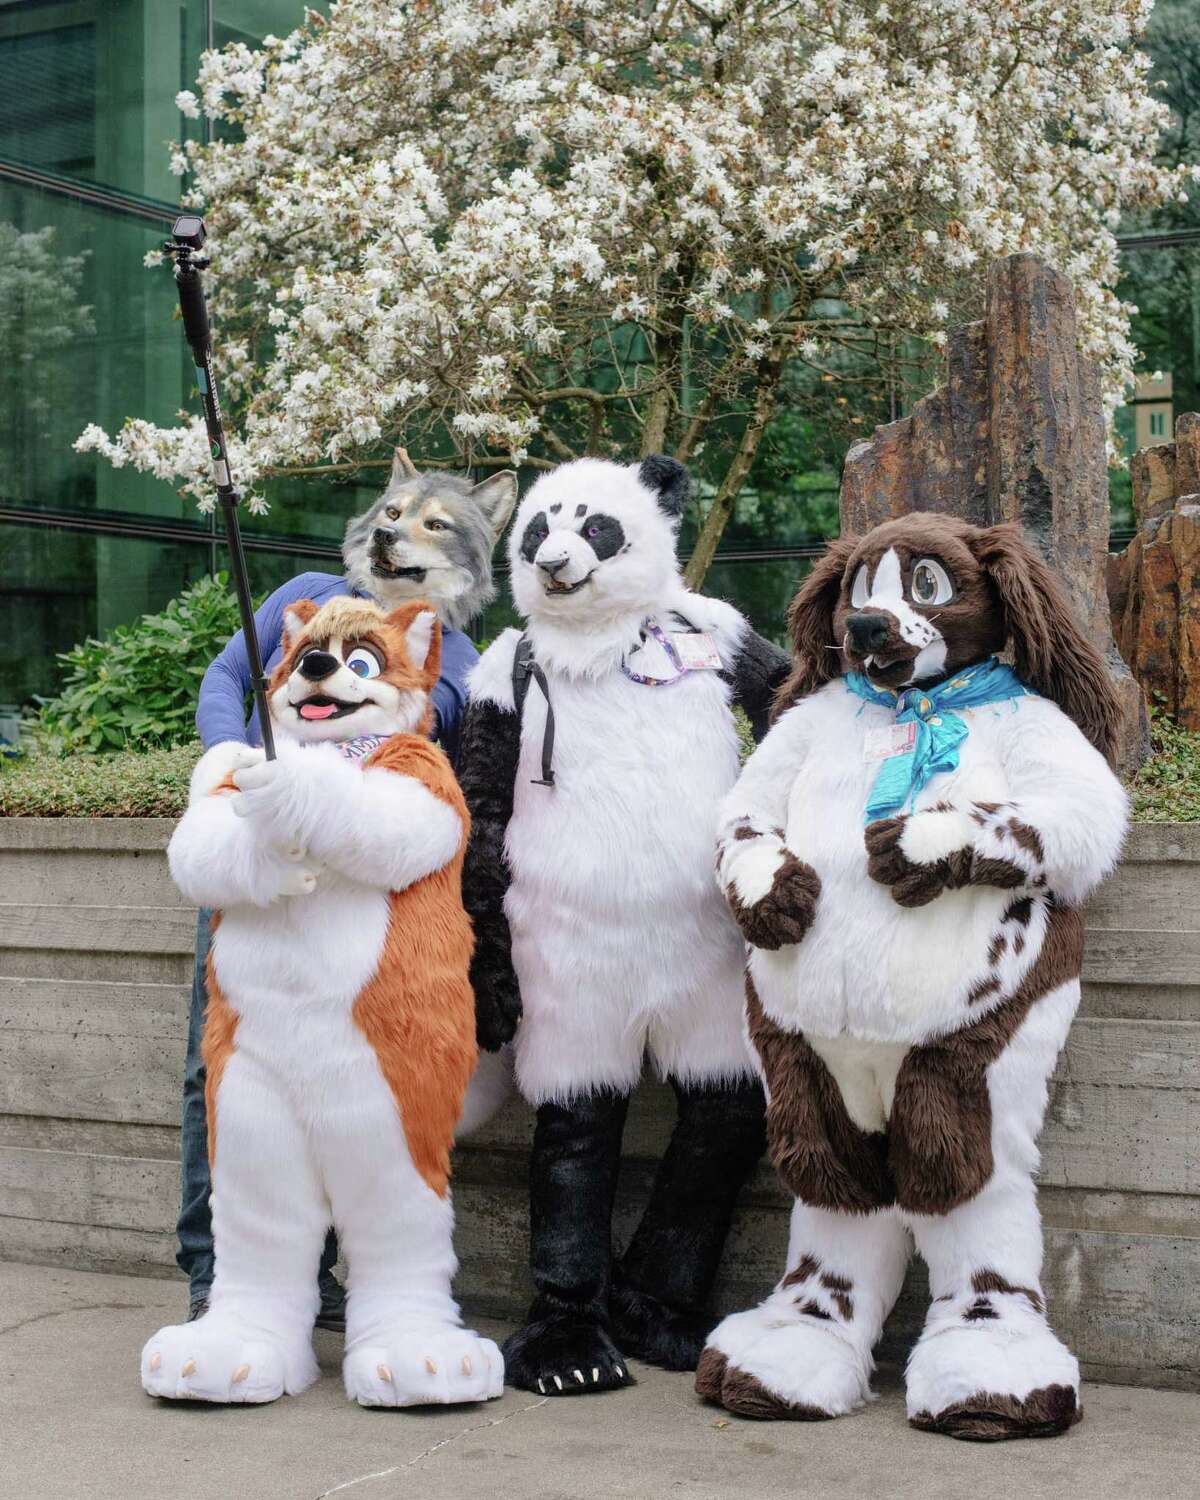 A group of furries takes a selfie on the final day of Sakura-Con, Seattle's annual anime convention, on Sunday, April 1, 2018.